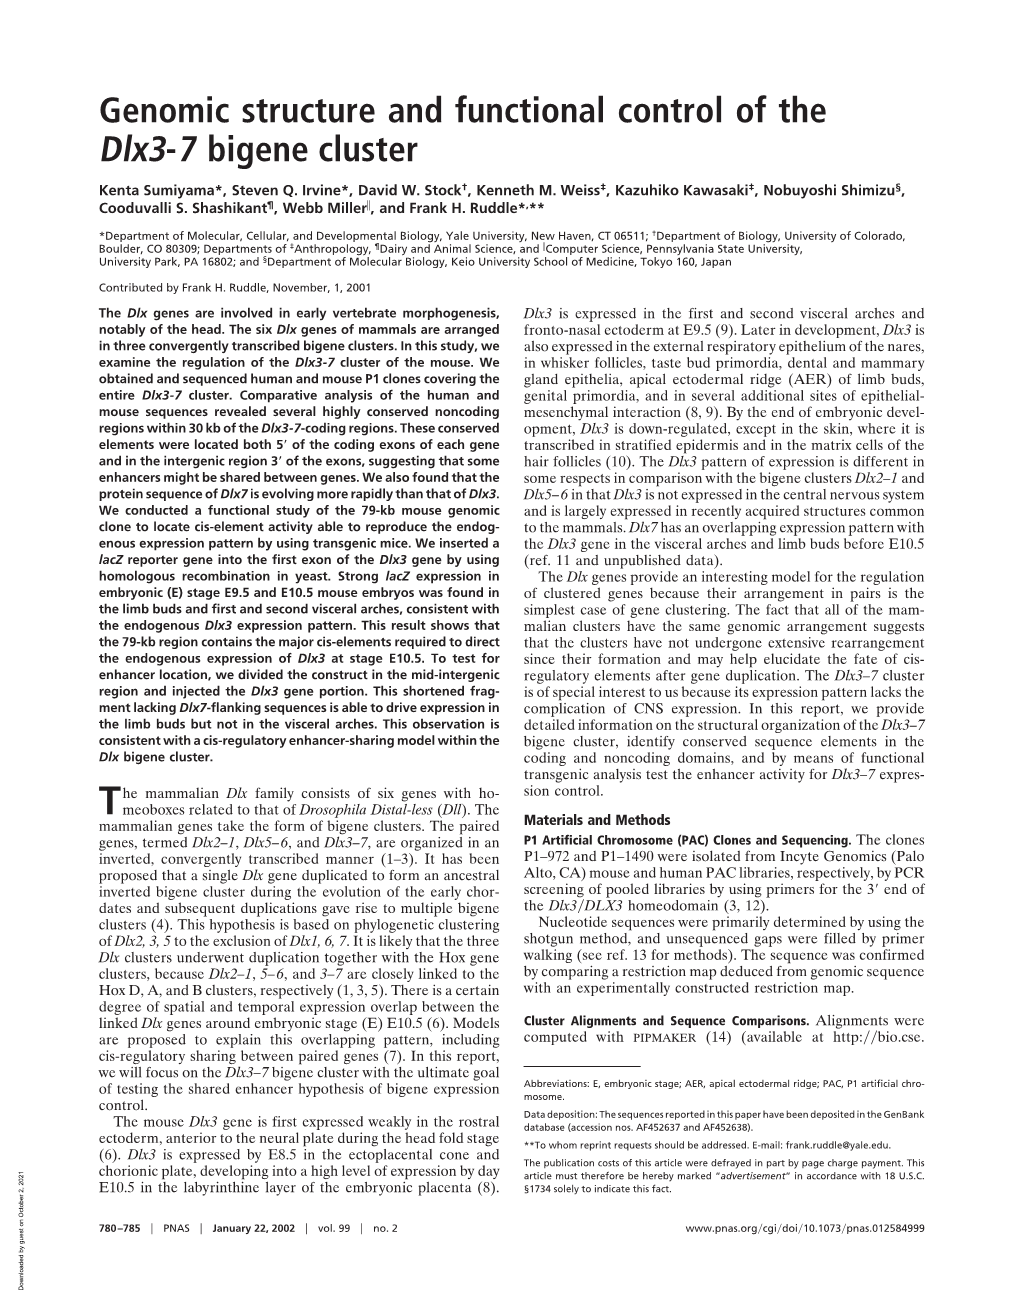 Genomic Structure and Functional Control of the Dlx3-7 Bigene Cluster